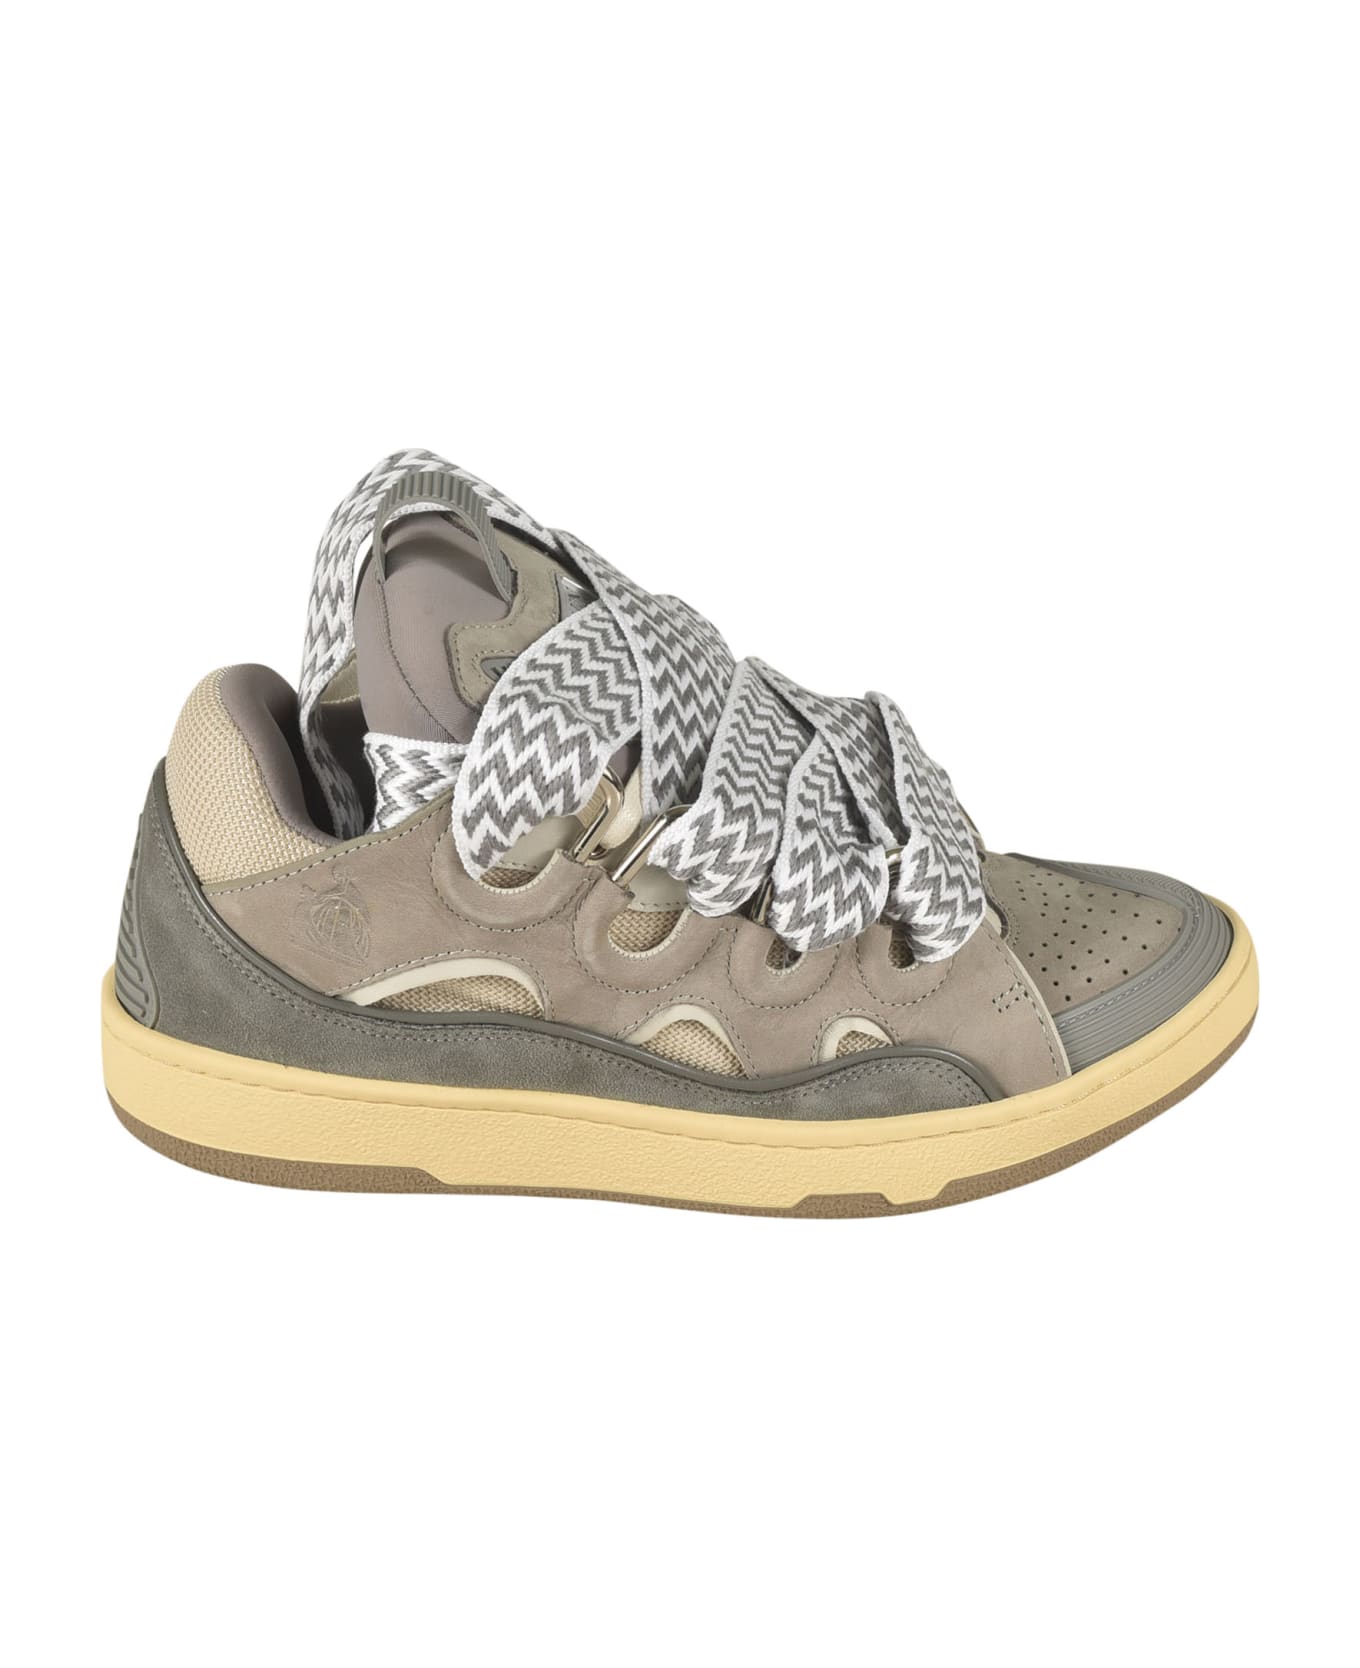 Lanvin Thick Lace Sneakers - Grey